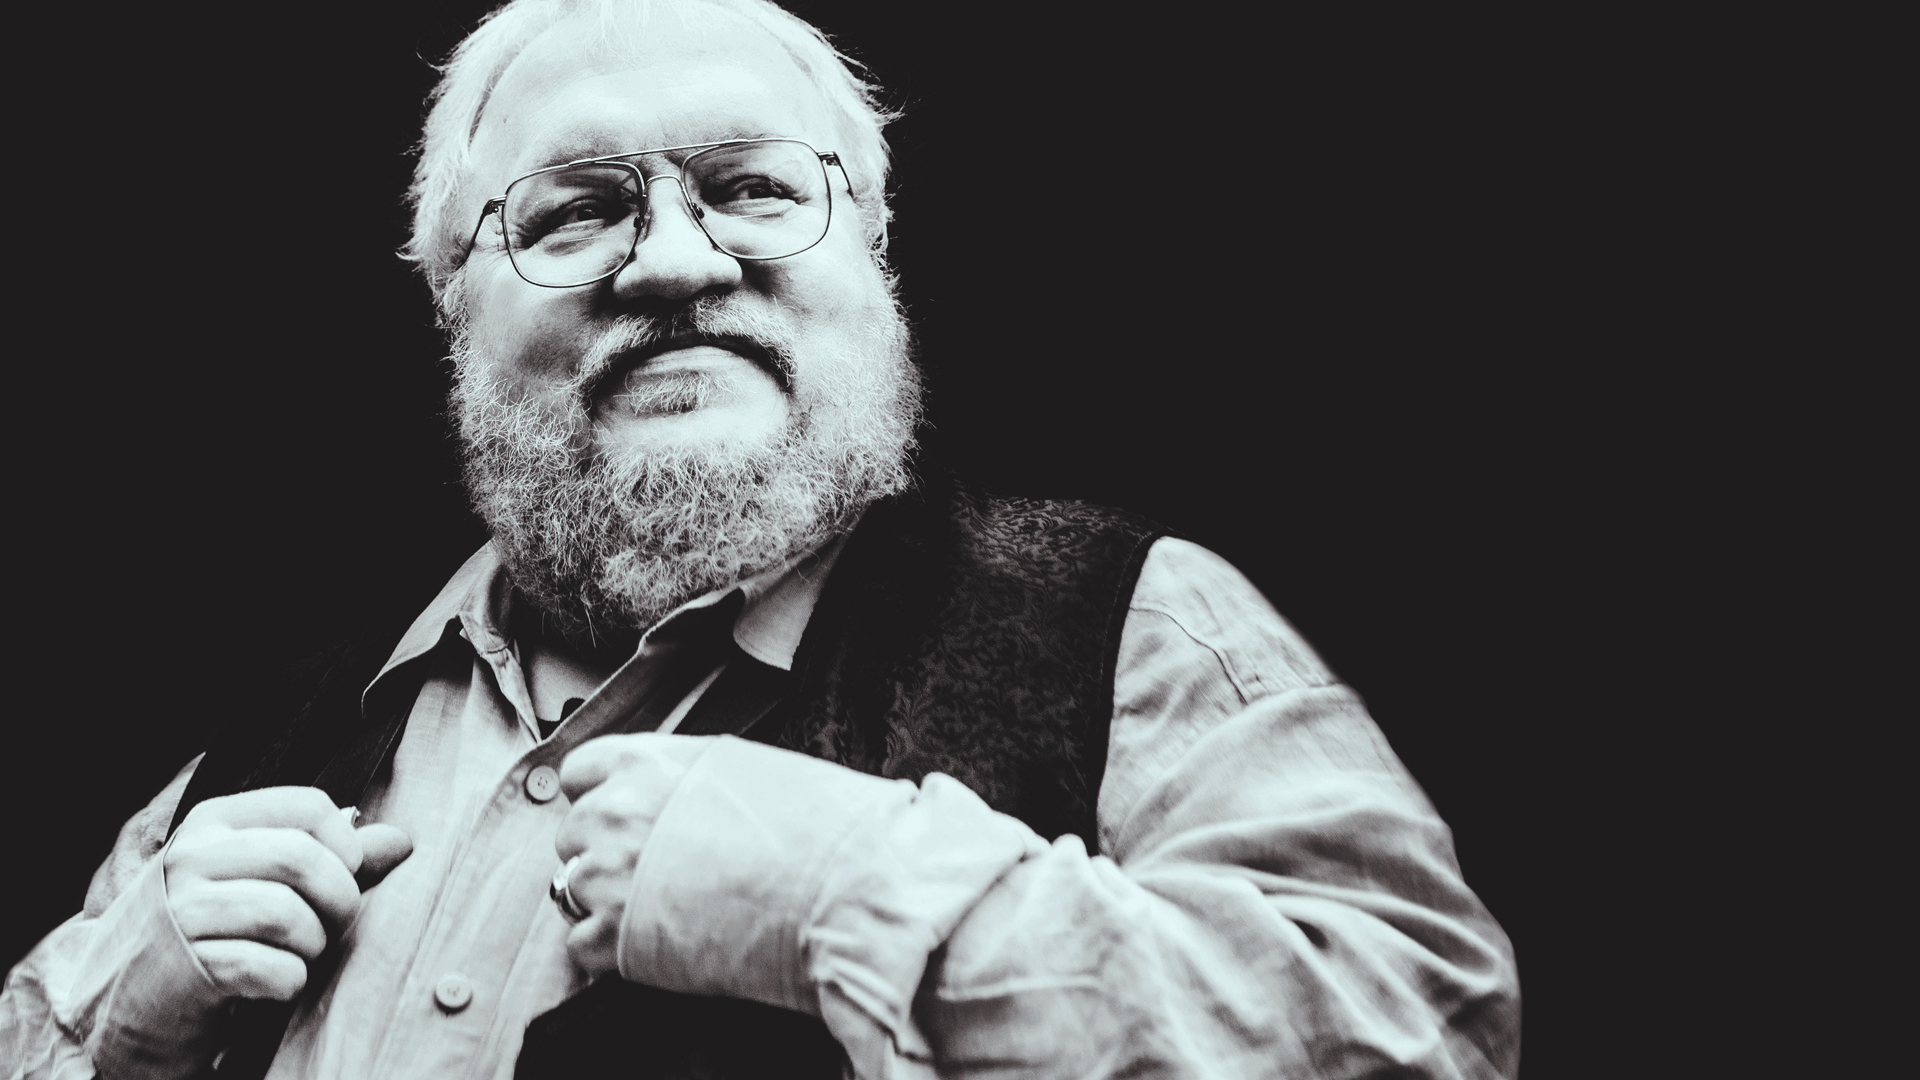 A complete timeline of George R.R. Martin's progress on The Winds of Winter